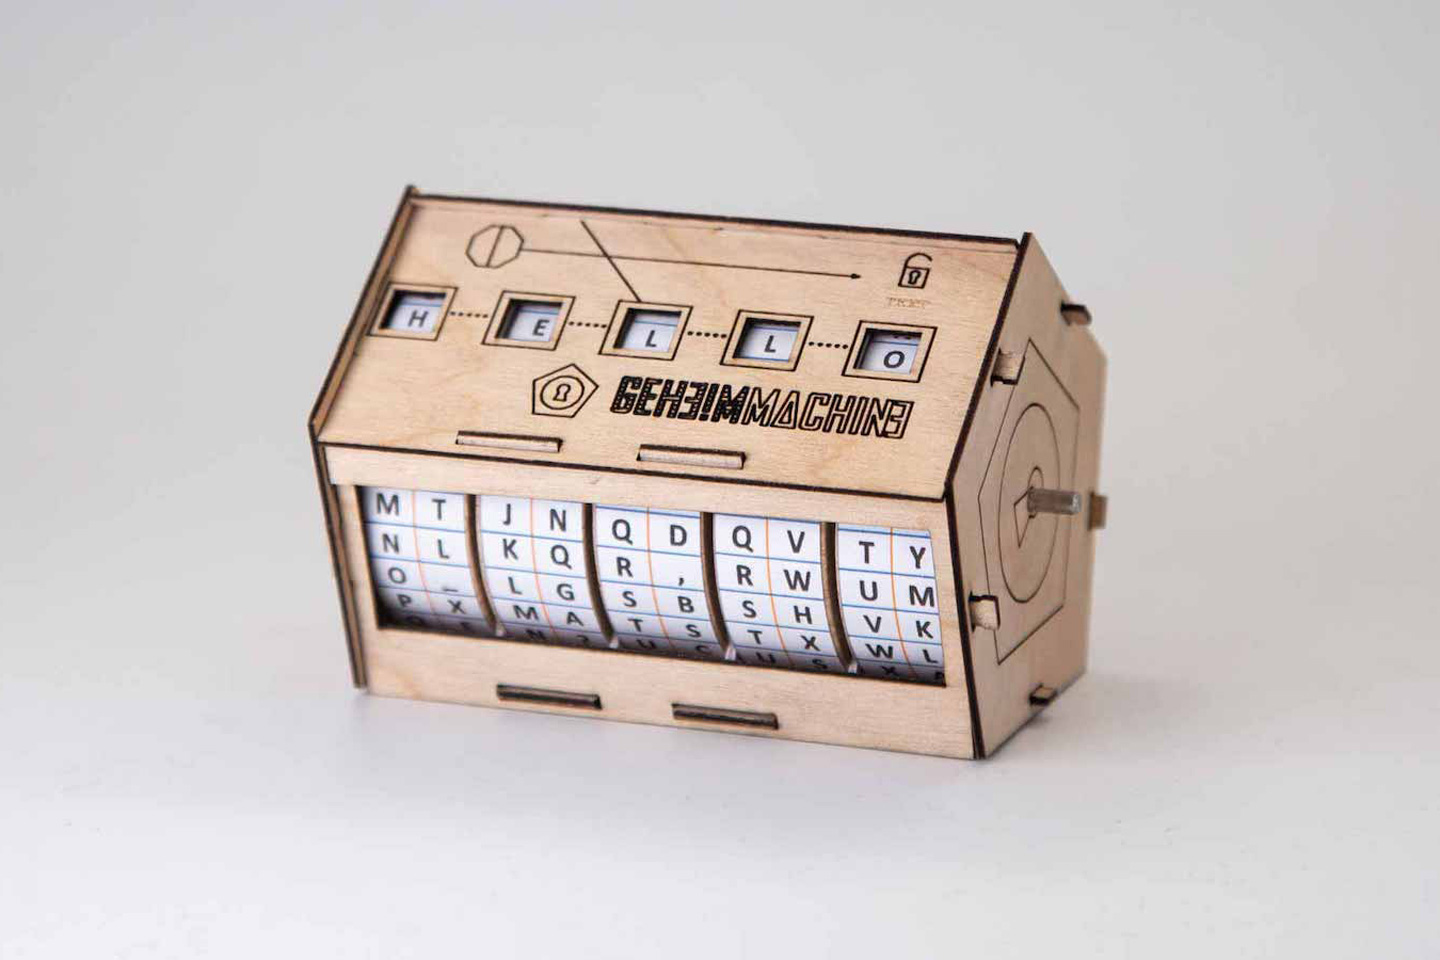 #This STEM toy cipher takes inspiration from one of the world’s oldest cryptography devices